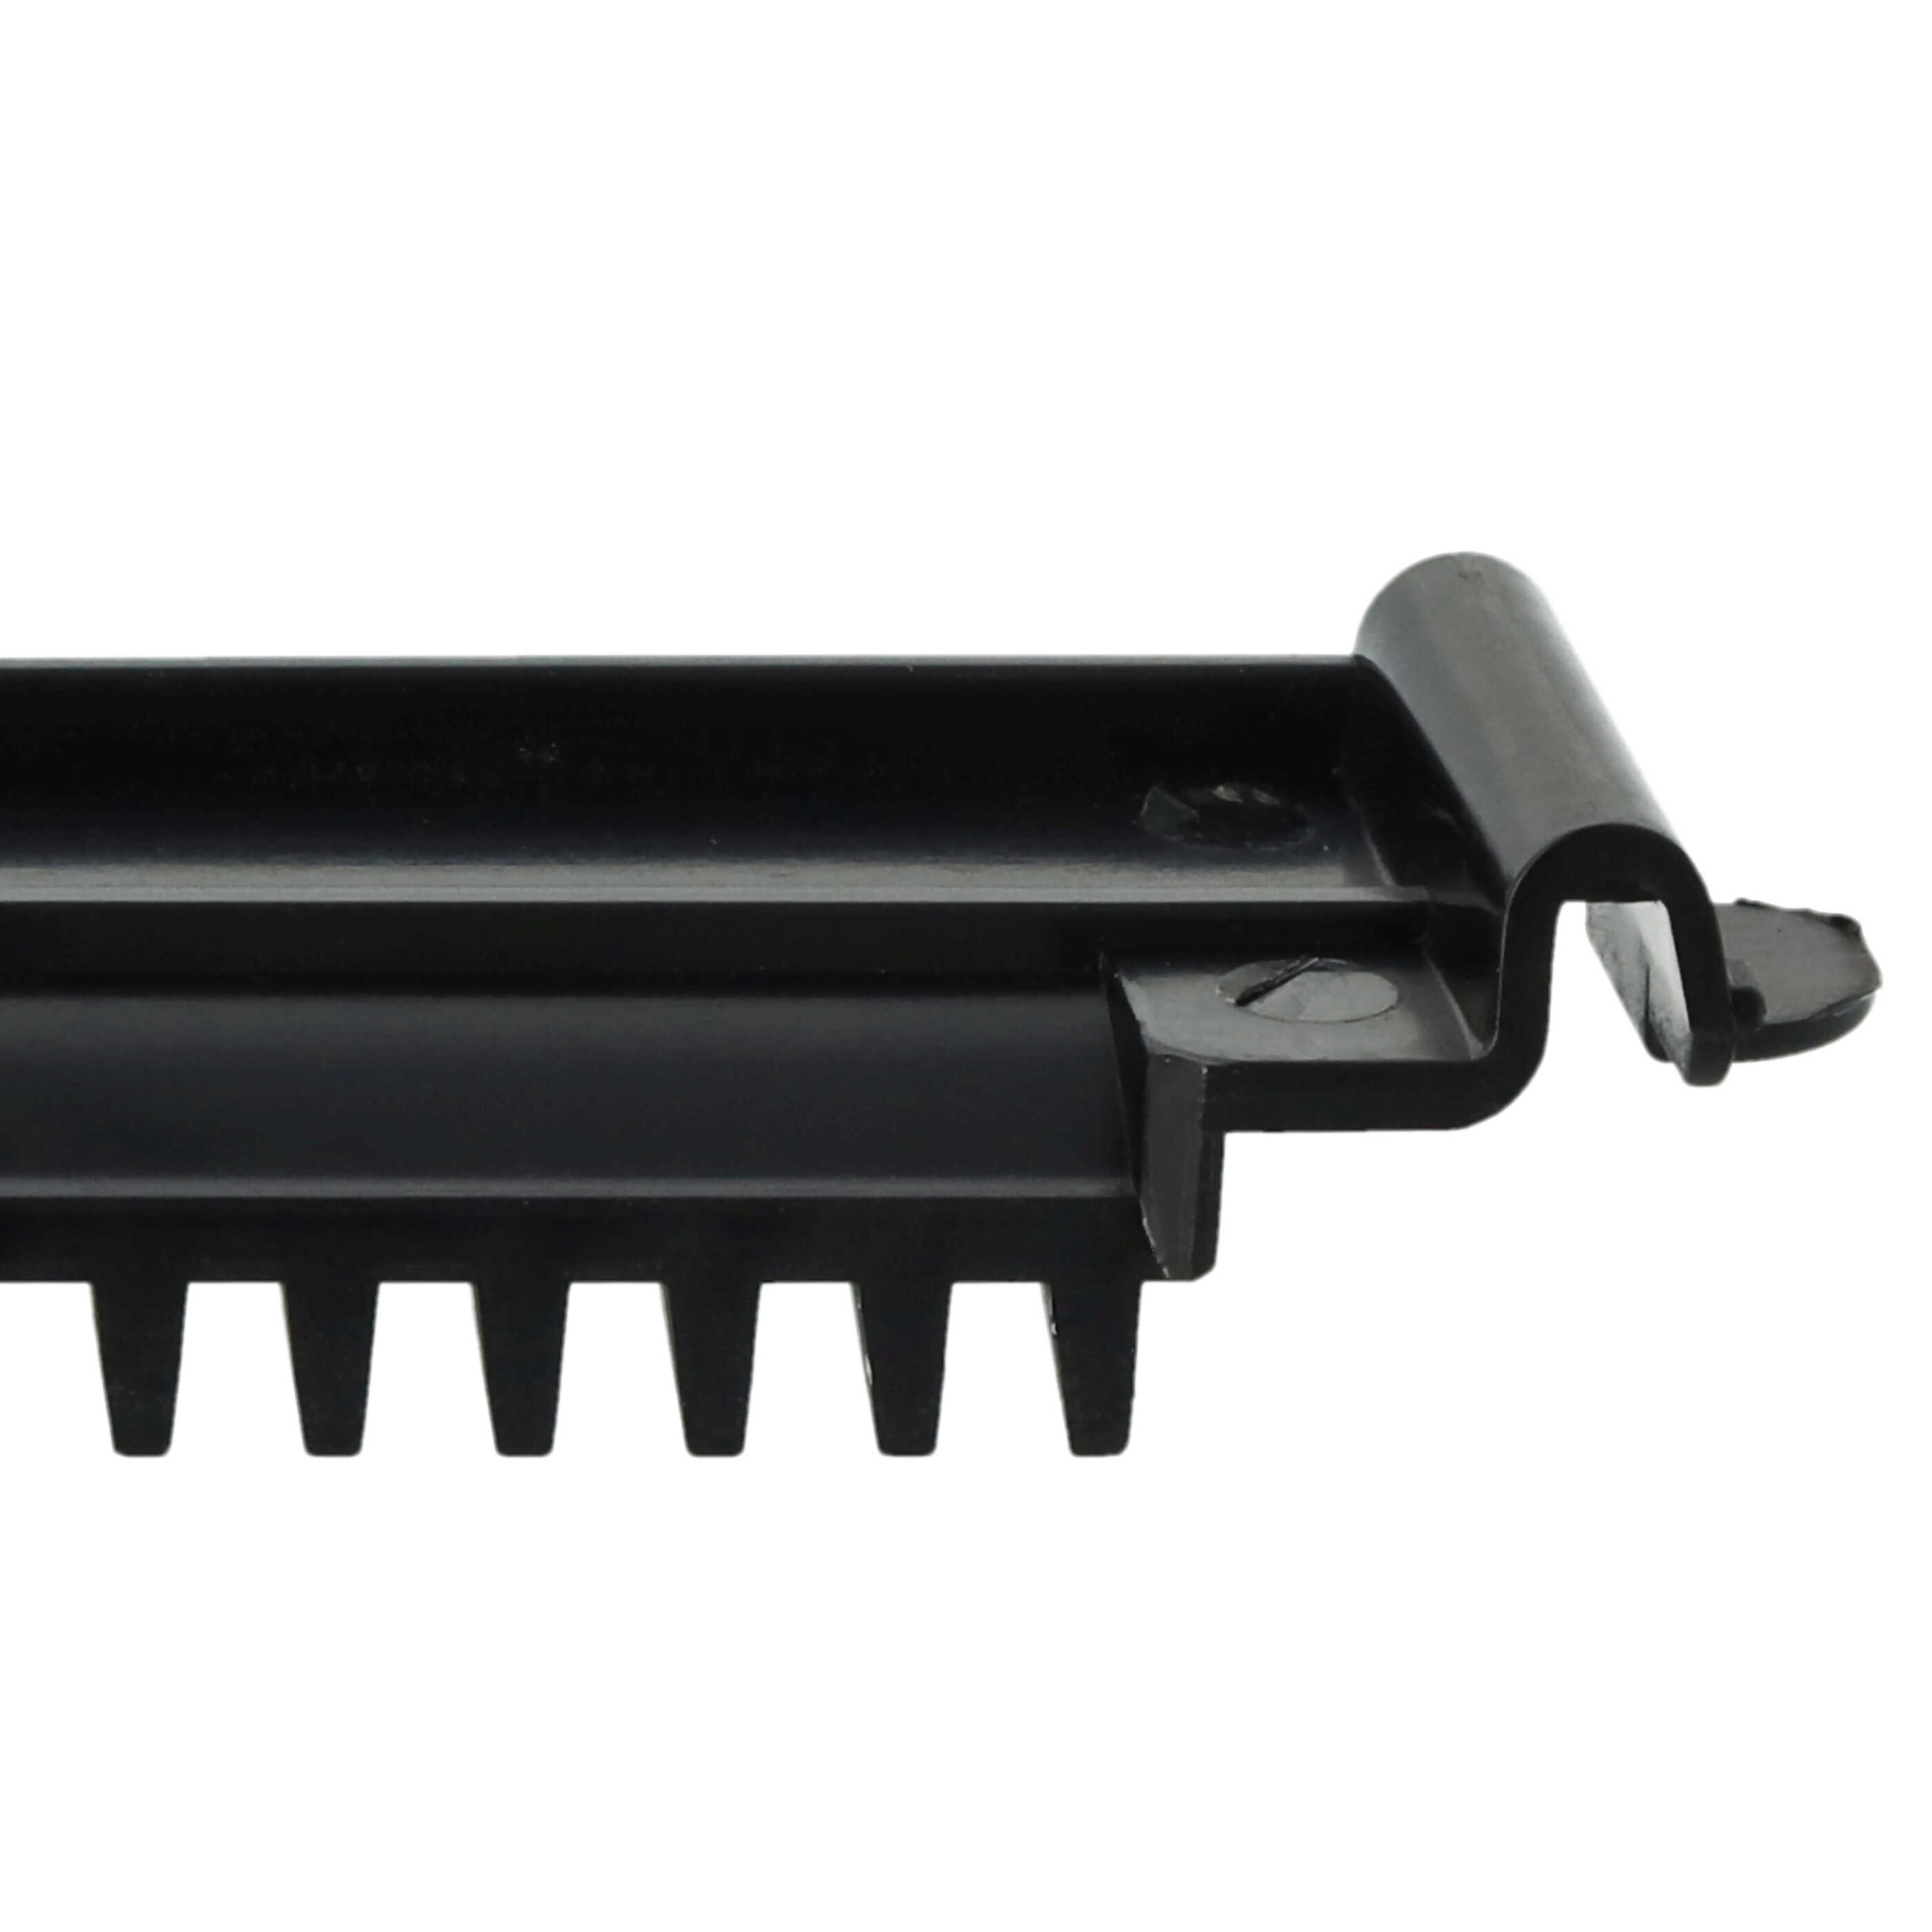 Door Flap for iRobot Roomba Robot Vacuum Cleaner etc. - with Teeth for Combing out the Round Brush